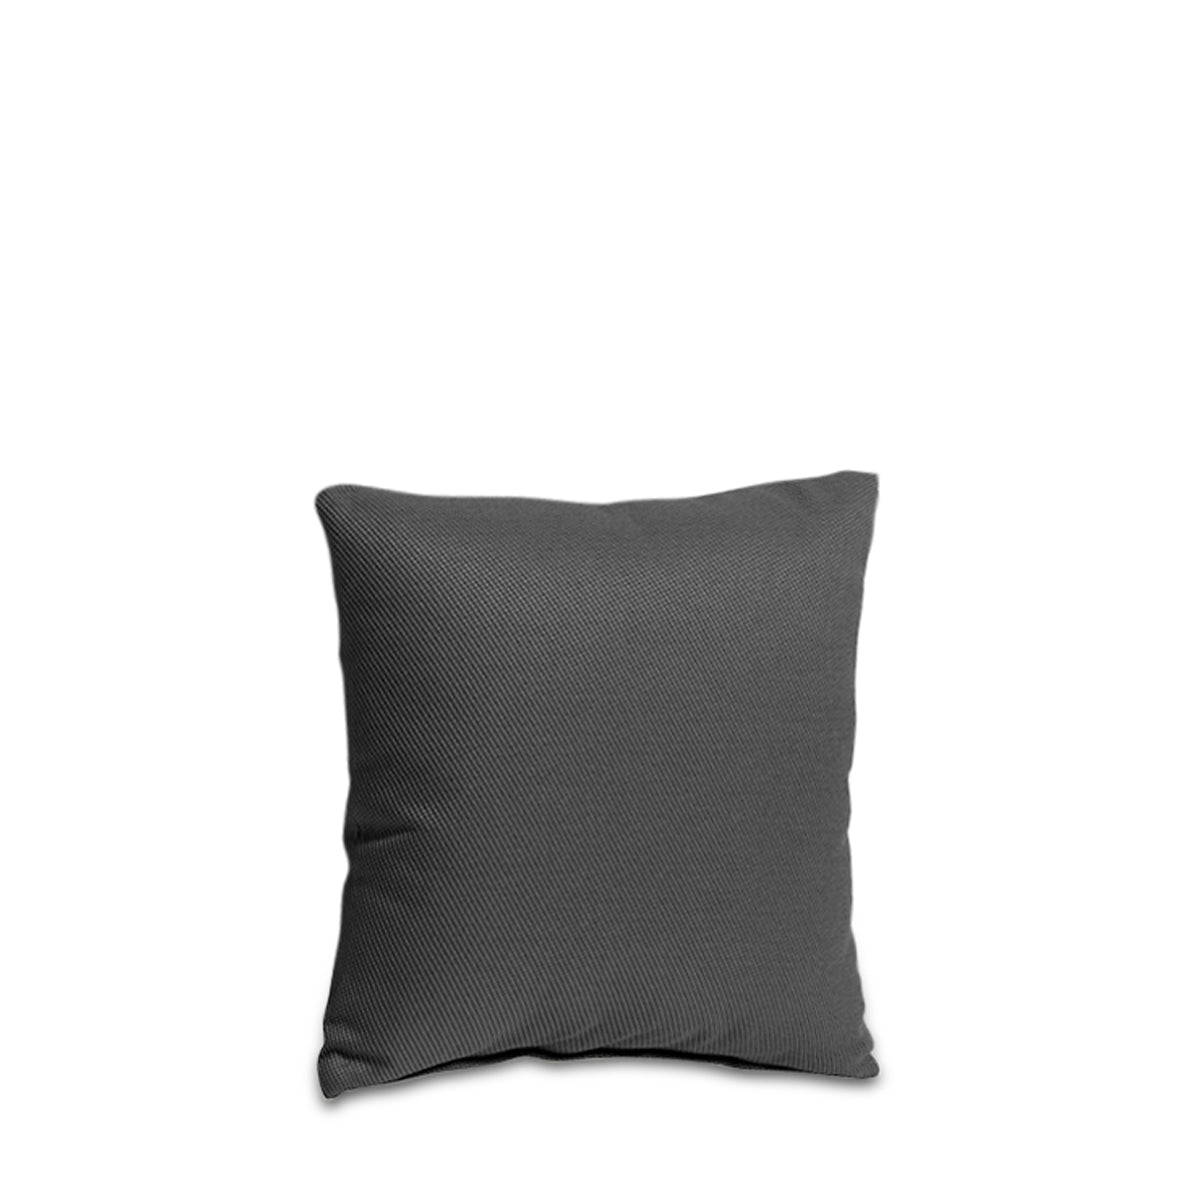 that's living outdoor small decorative outdoor pillows black outdoor cushions 